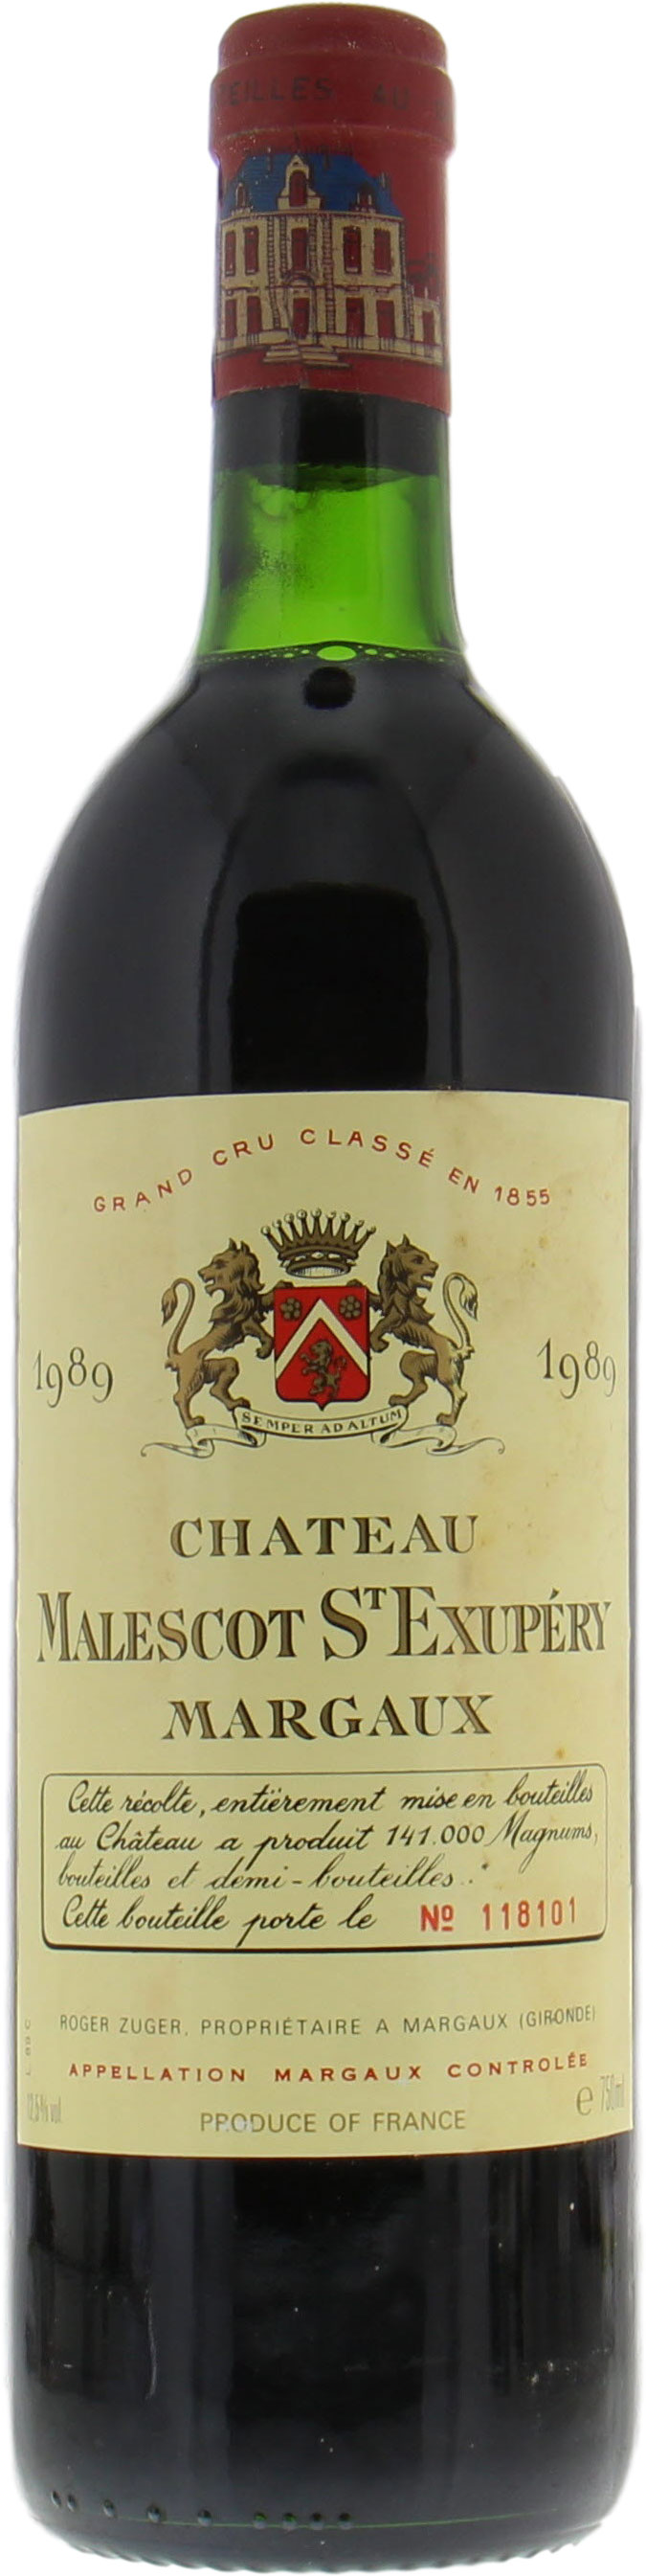 Chateau Malescot-St-Exupery - Chateau Malescot-St-Exupery 1989 Perfect